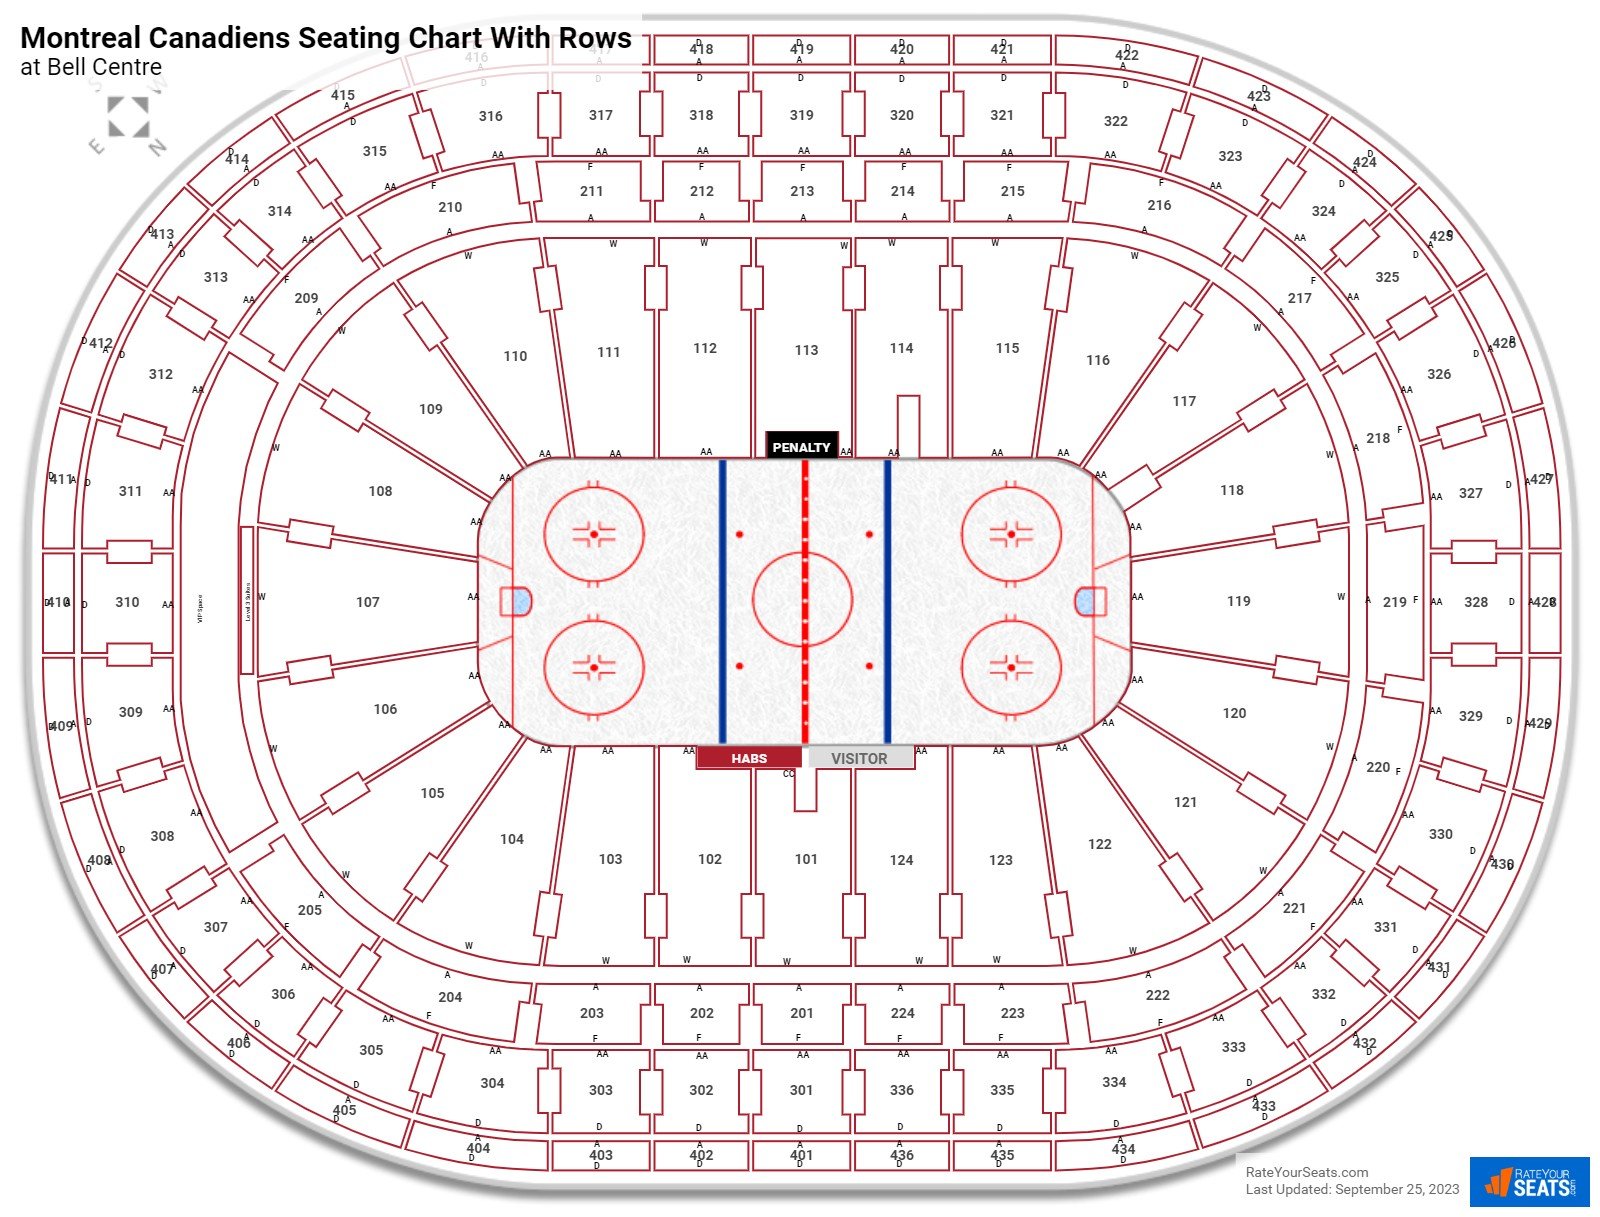 Bell Centre seating chart with row numbers